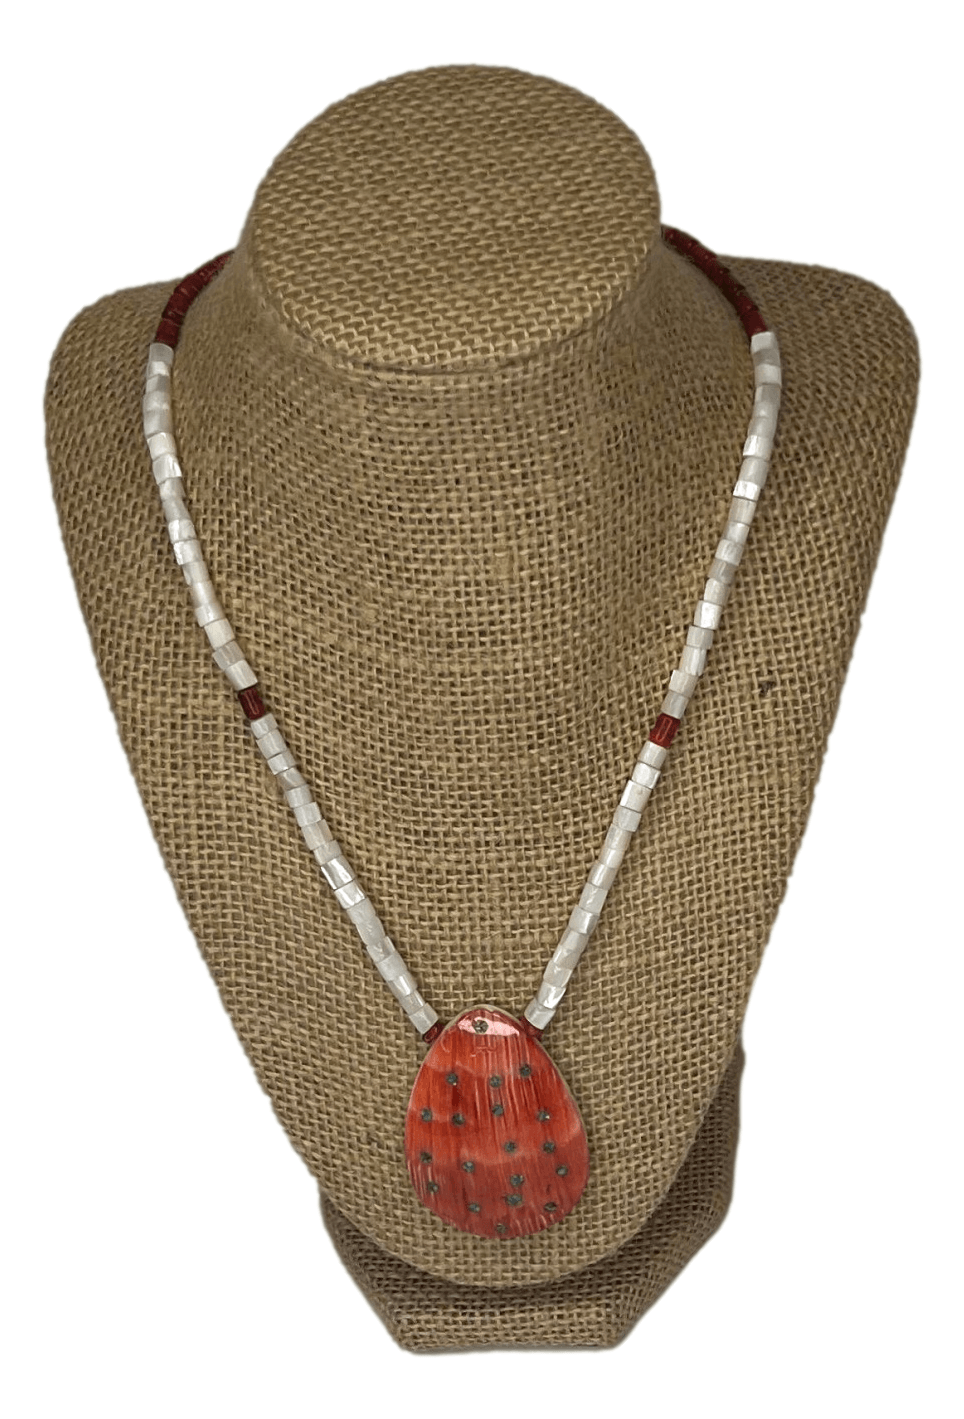 Necklace Spiny Oyster Shell Turquoise Inlay Mother of Pearl Beads Handcrafted By JoAnne Garcia From the Santo Domingo Pueblo in New Mexico - Ysleta Mission Gift Shop- VOTED El Paso's Best Gift Shop